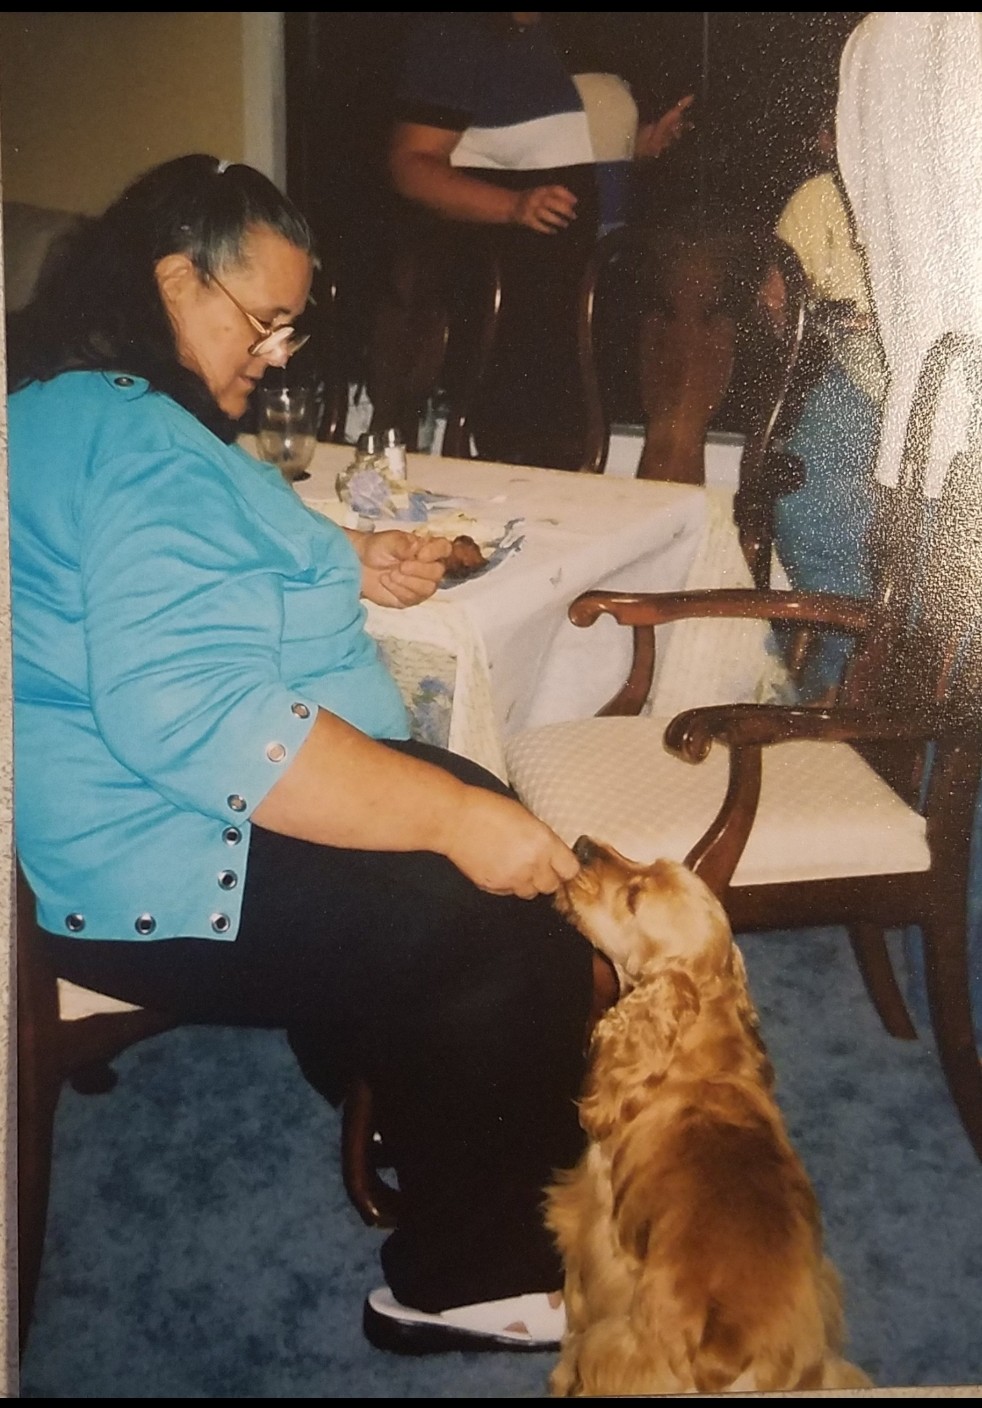 Take care of my precious Rusty dear cousin...he was rotten after those steak scraps, and lived to 20yo.  I know you're with our mamas,  and Michael,  who loved you so. <br />
We miss you. <br />
Love,<br />
Pam,Gary,Stephanie  Jordan and all my grands.